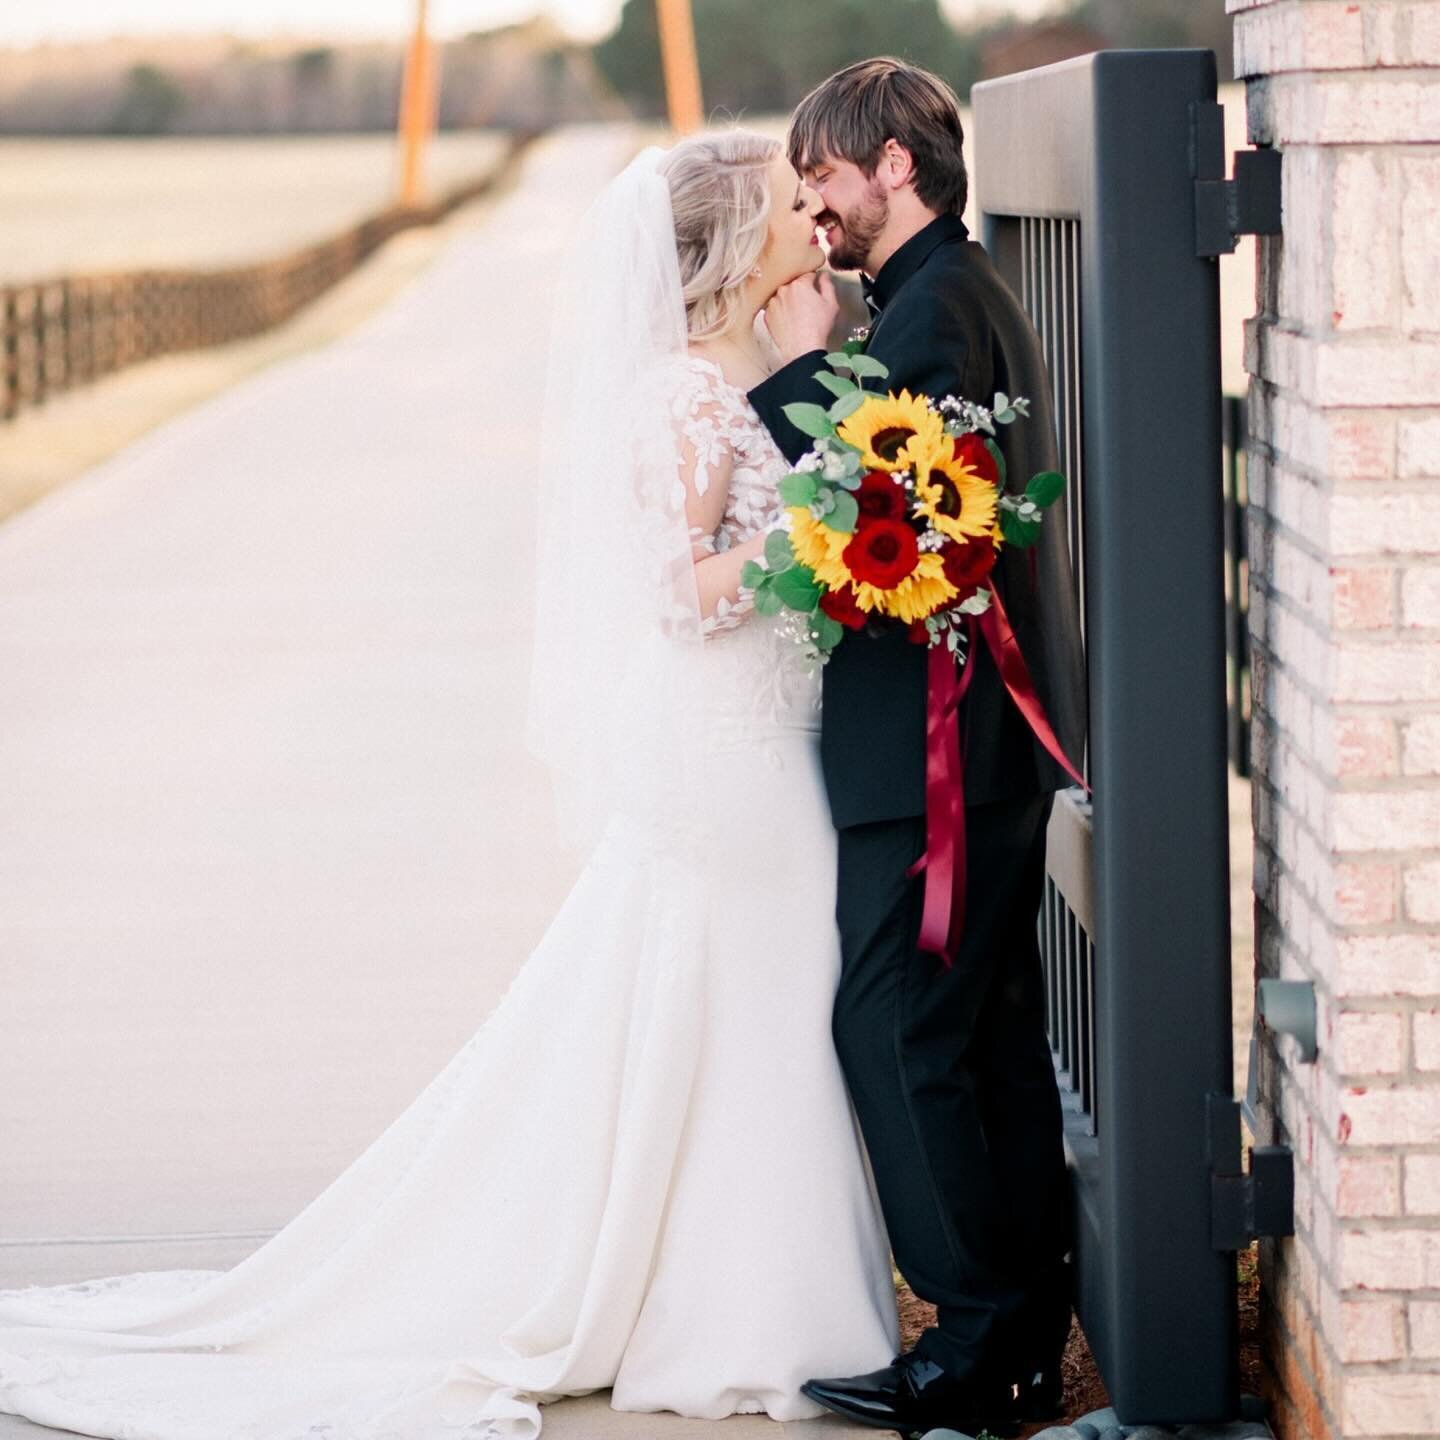 Introducing Mr. &amp; Mrs. Meadows! 

Skylar and Kyle had a very windy but beautiful day at the Towers at Snows Mill. Skylar was down for anything in the wind&mdash;even striking a Marilyn Monroe pose! I loved getting to capture their beautiful day&m